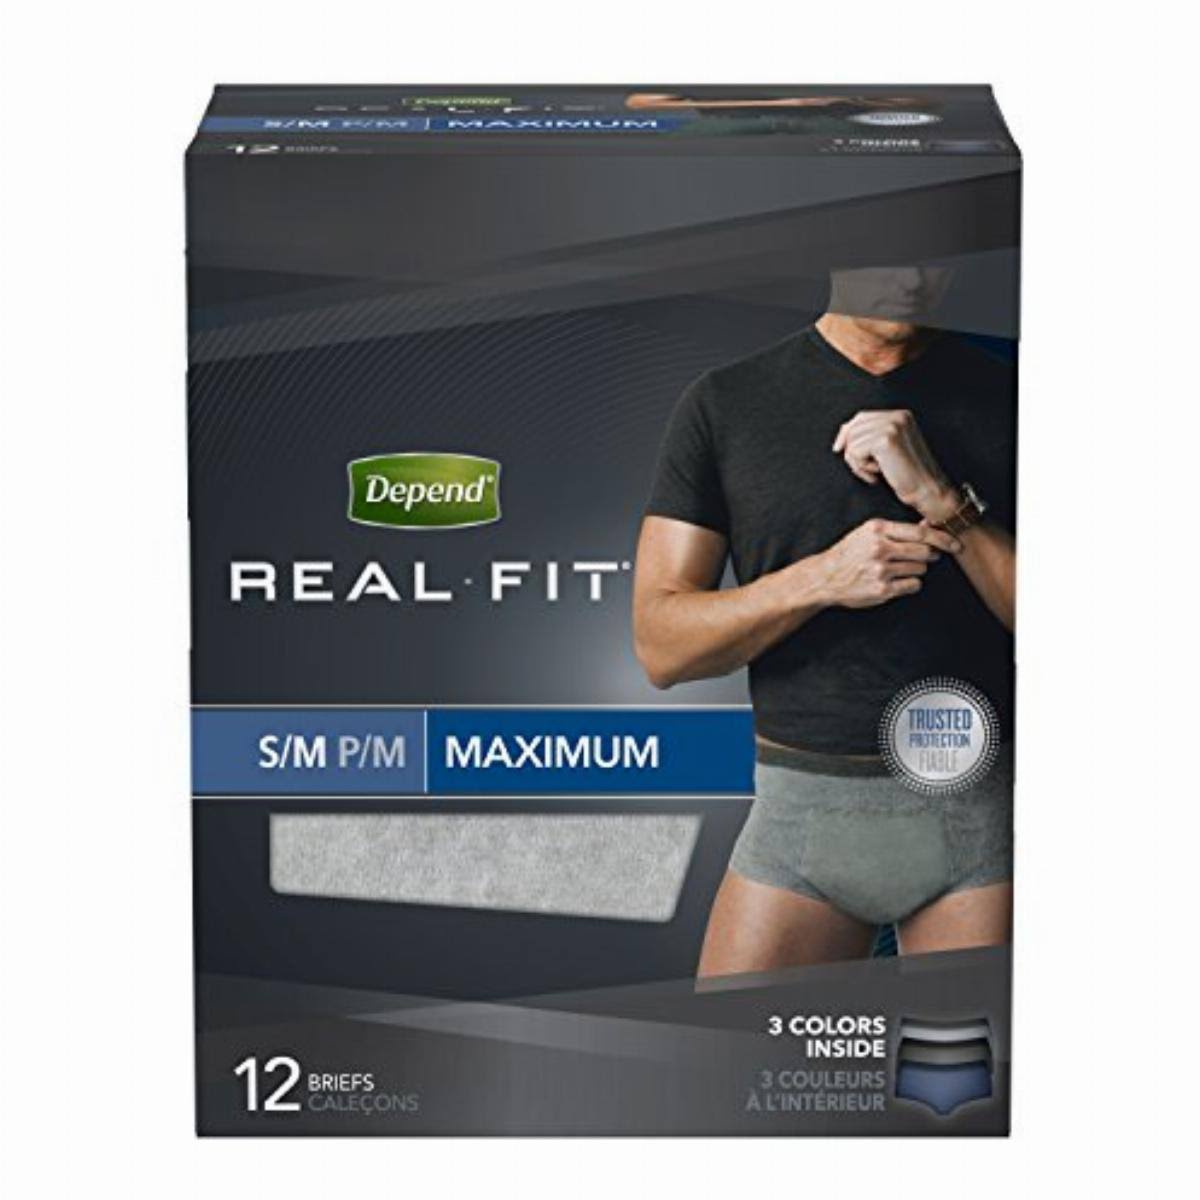 Depend Real Fit for Men Incontinence Briefs - Maximum Absorbency, Small/Medium, 12ct